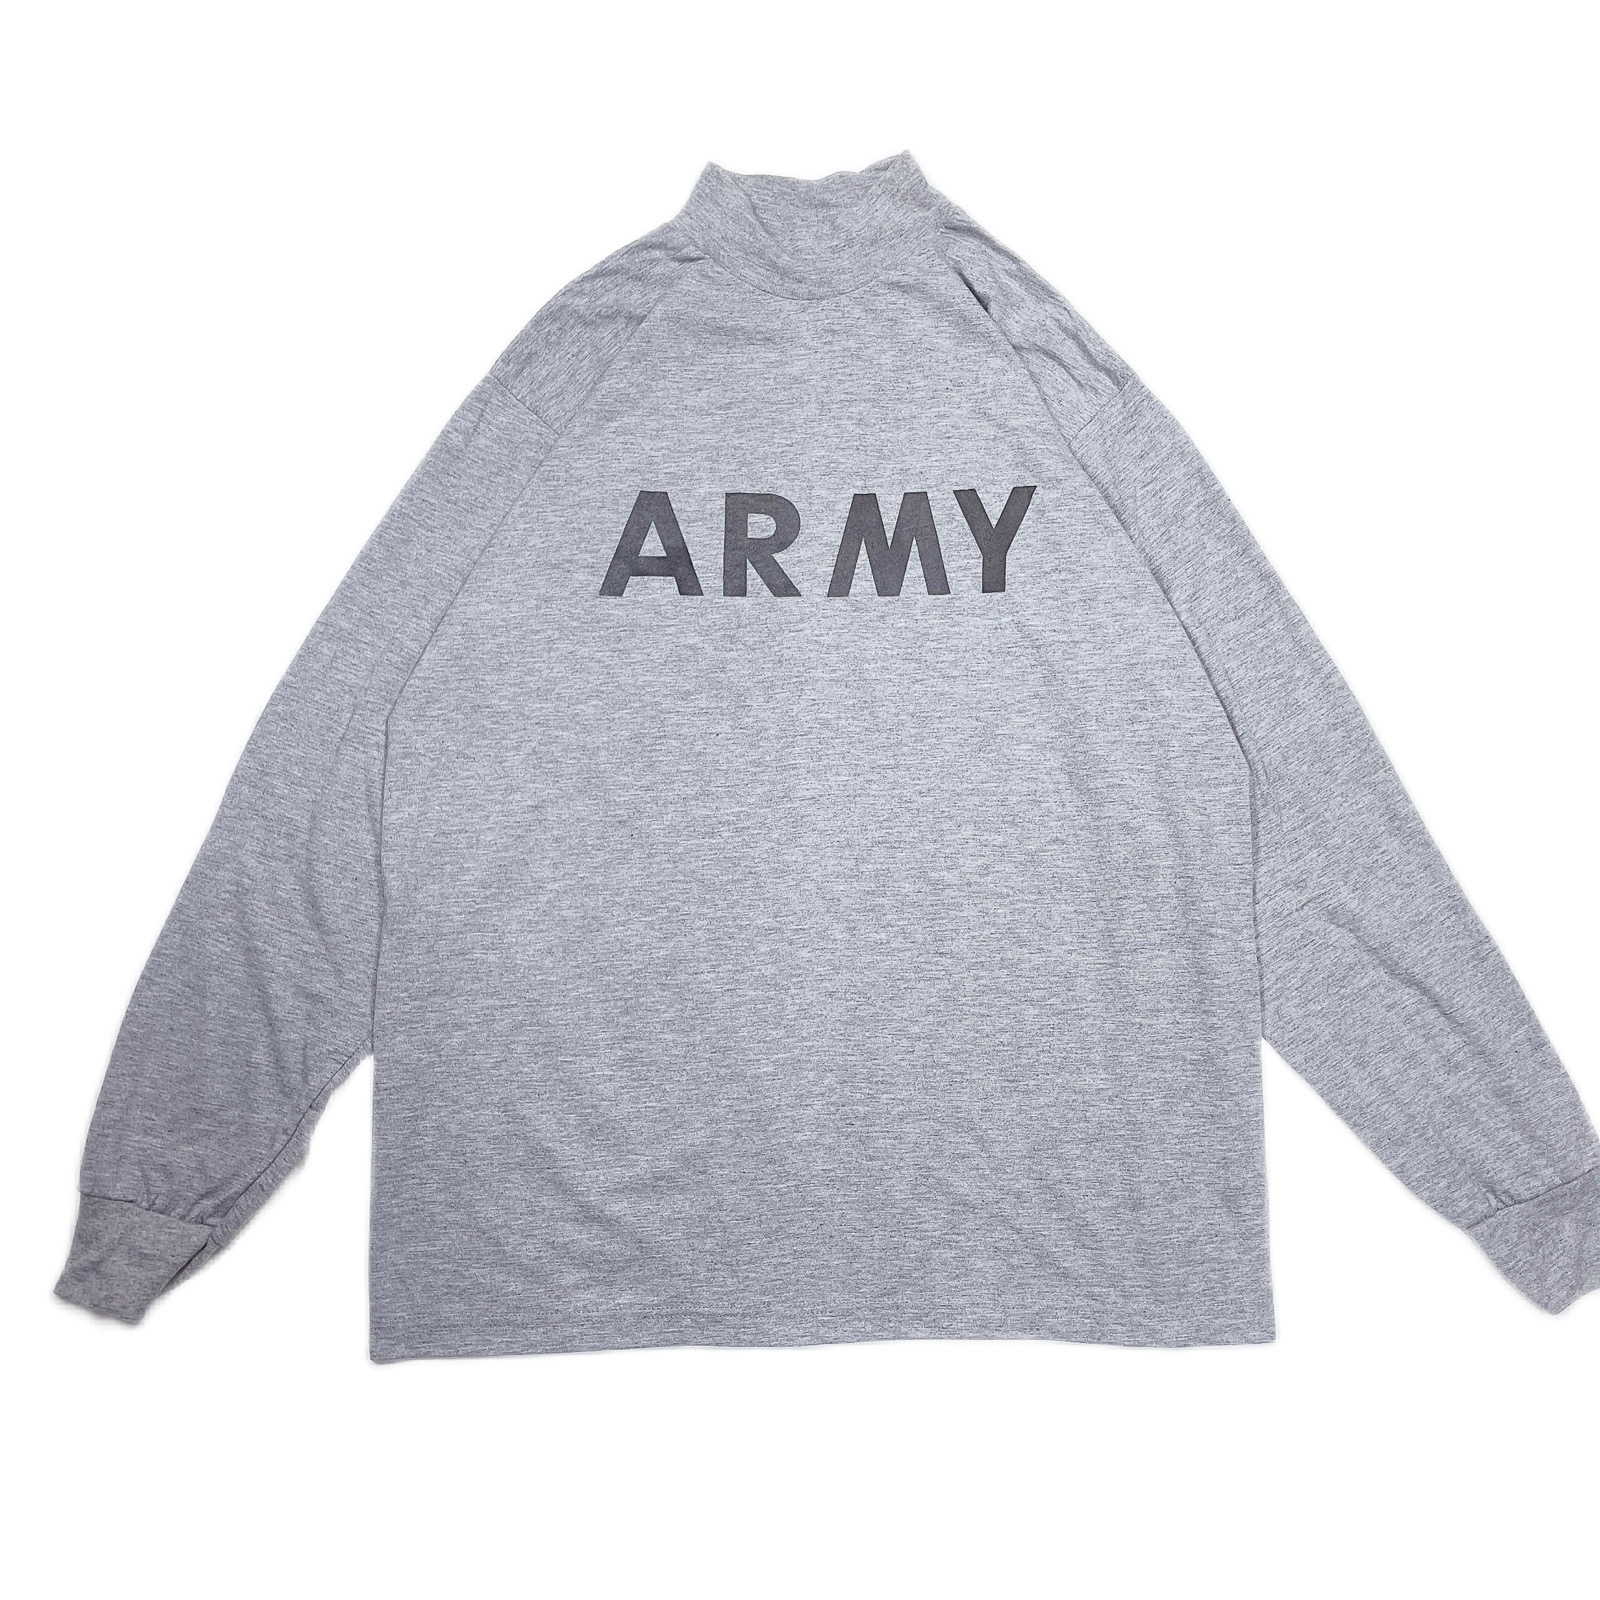 Lsize US ARMY mock neck TEE 23100226 米軍 アーミー ミリタリー ロン